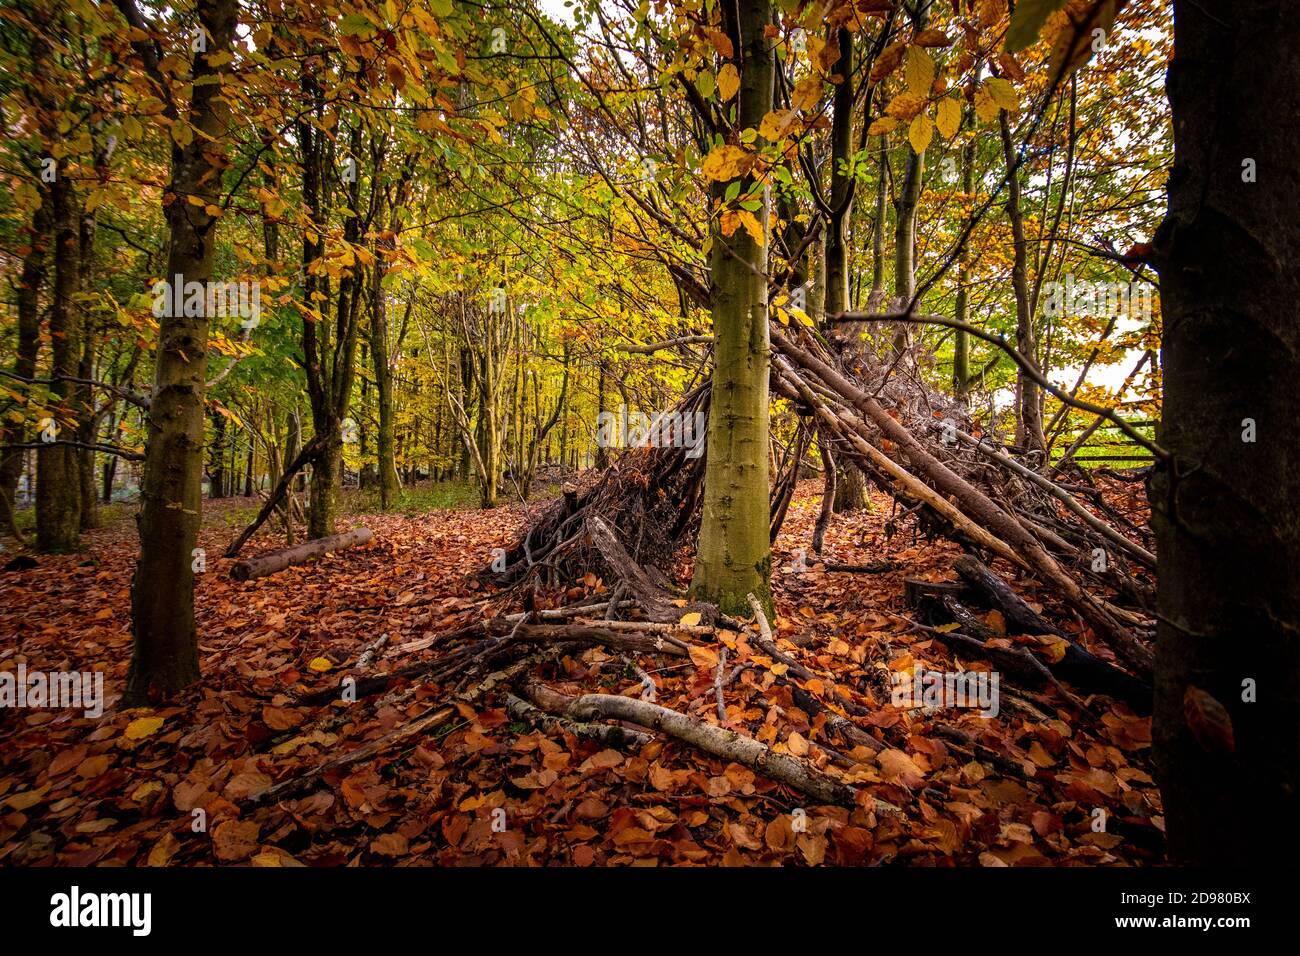 A hut in colorful autumn forest Stock Photo